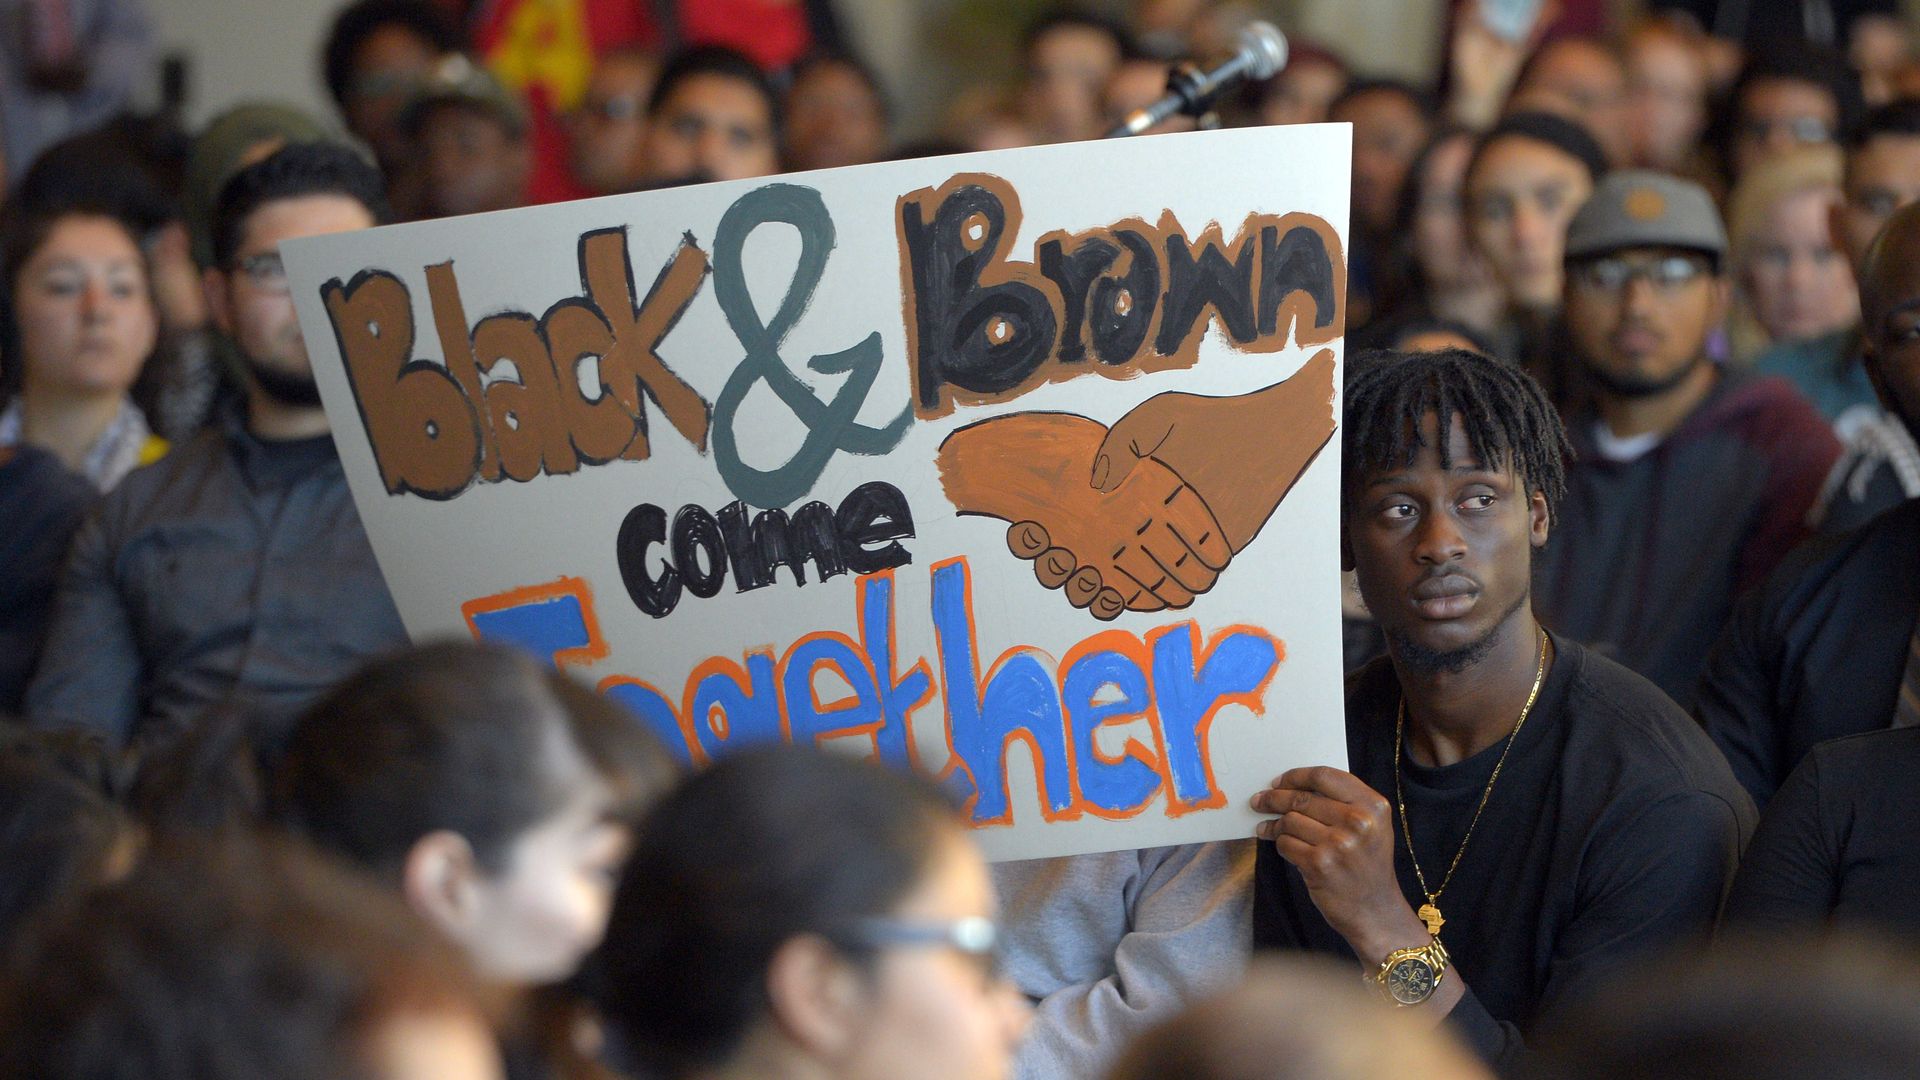 Black and Latino students fill a CSULB ballroom to voice concerns over what many groups feel is racism on campus in Long Beach, California.